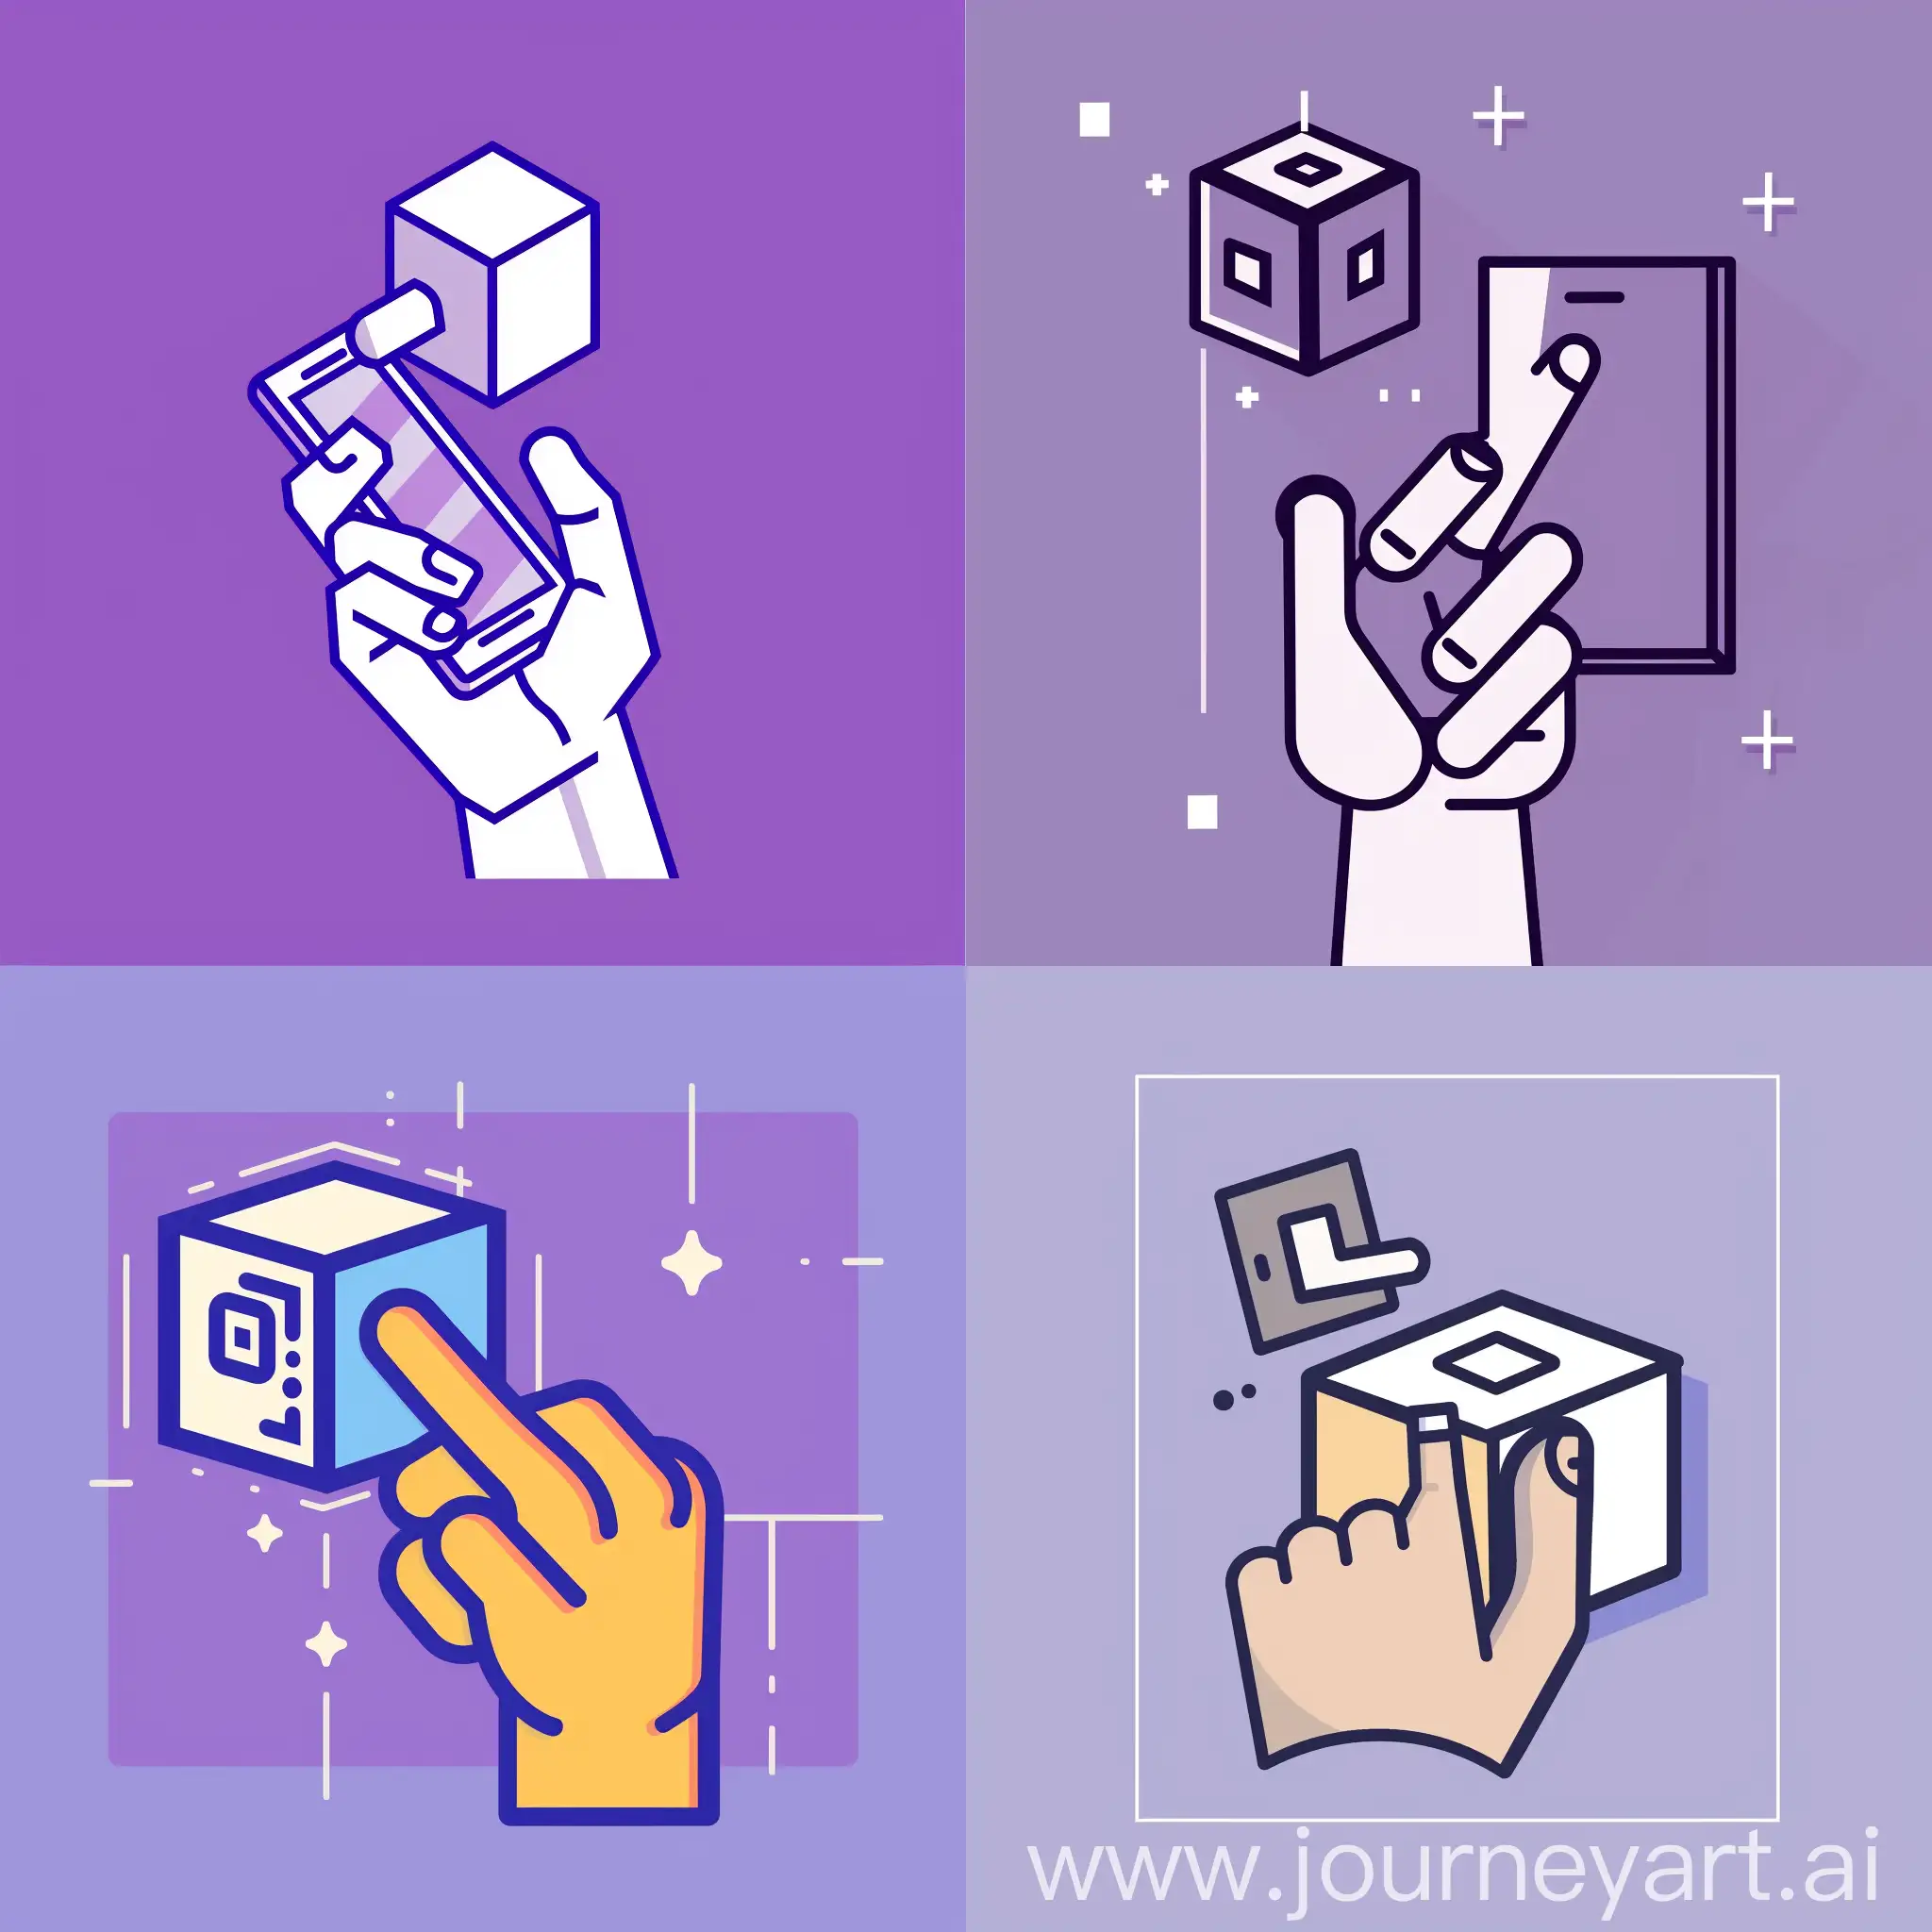 Digital-Connectivity-Hand-Holding-Phone-with-Cube-on-Purple-Background